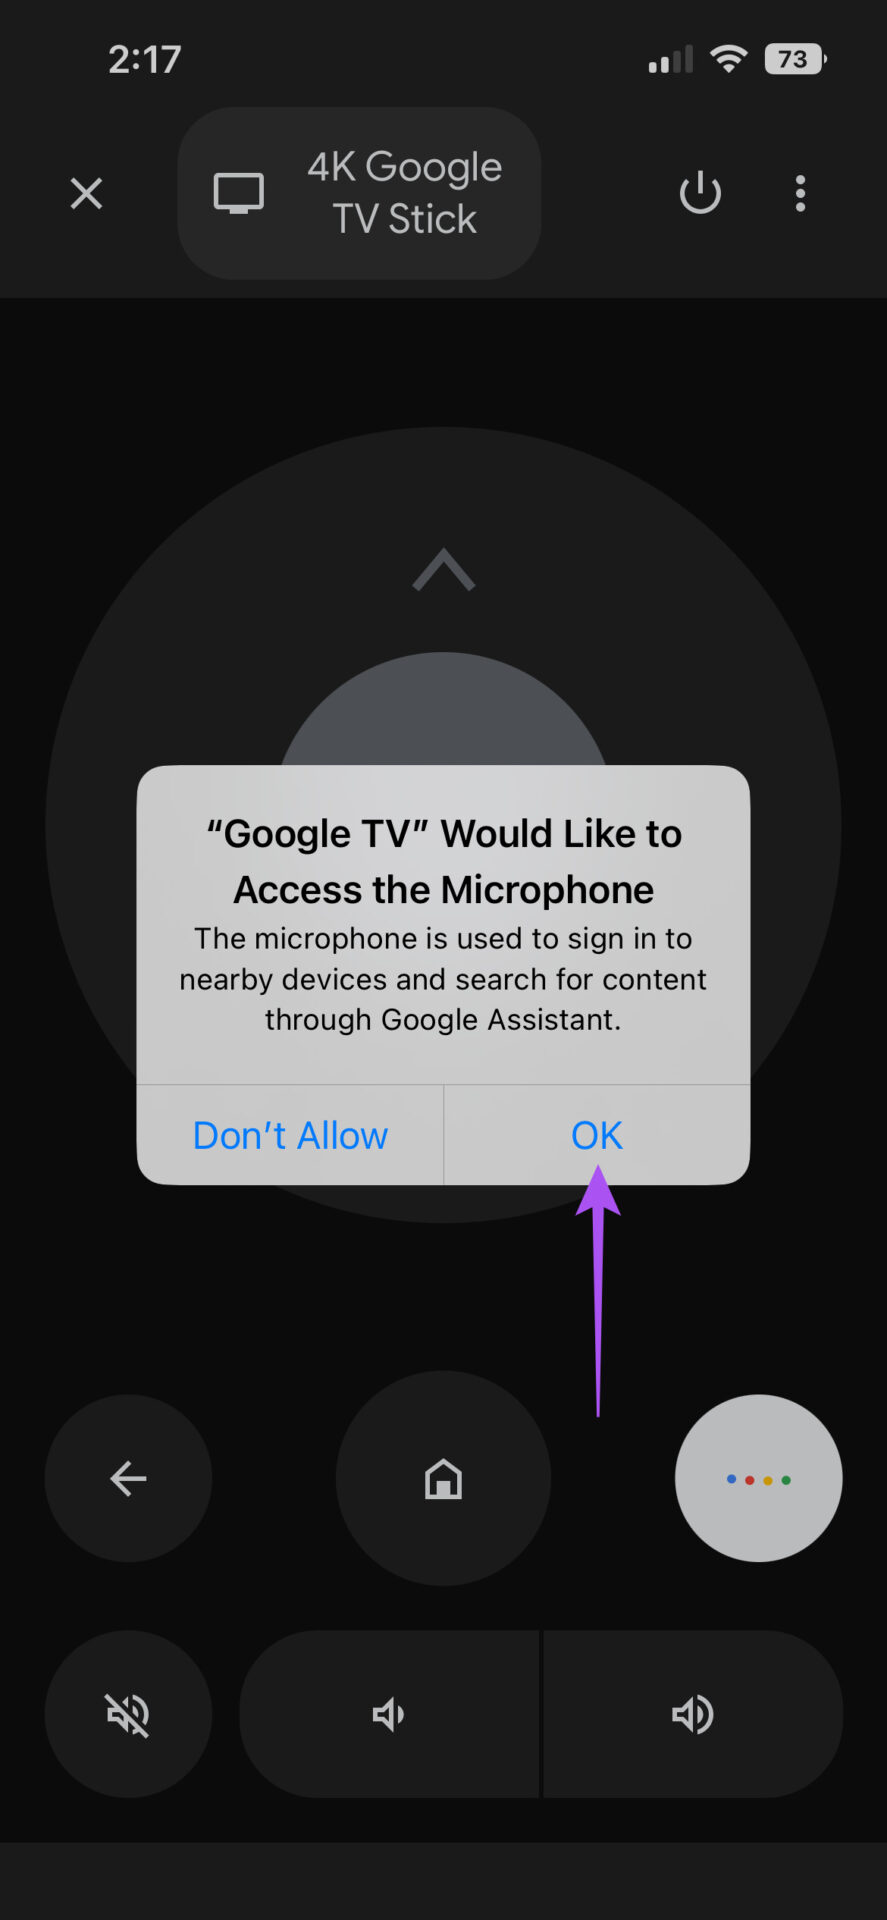 How to Use iPhone as Google TV Remote - 90